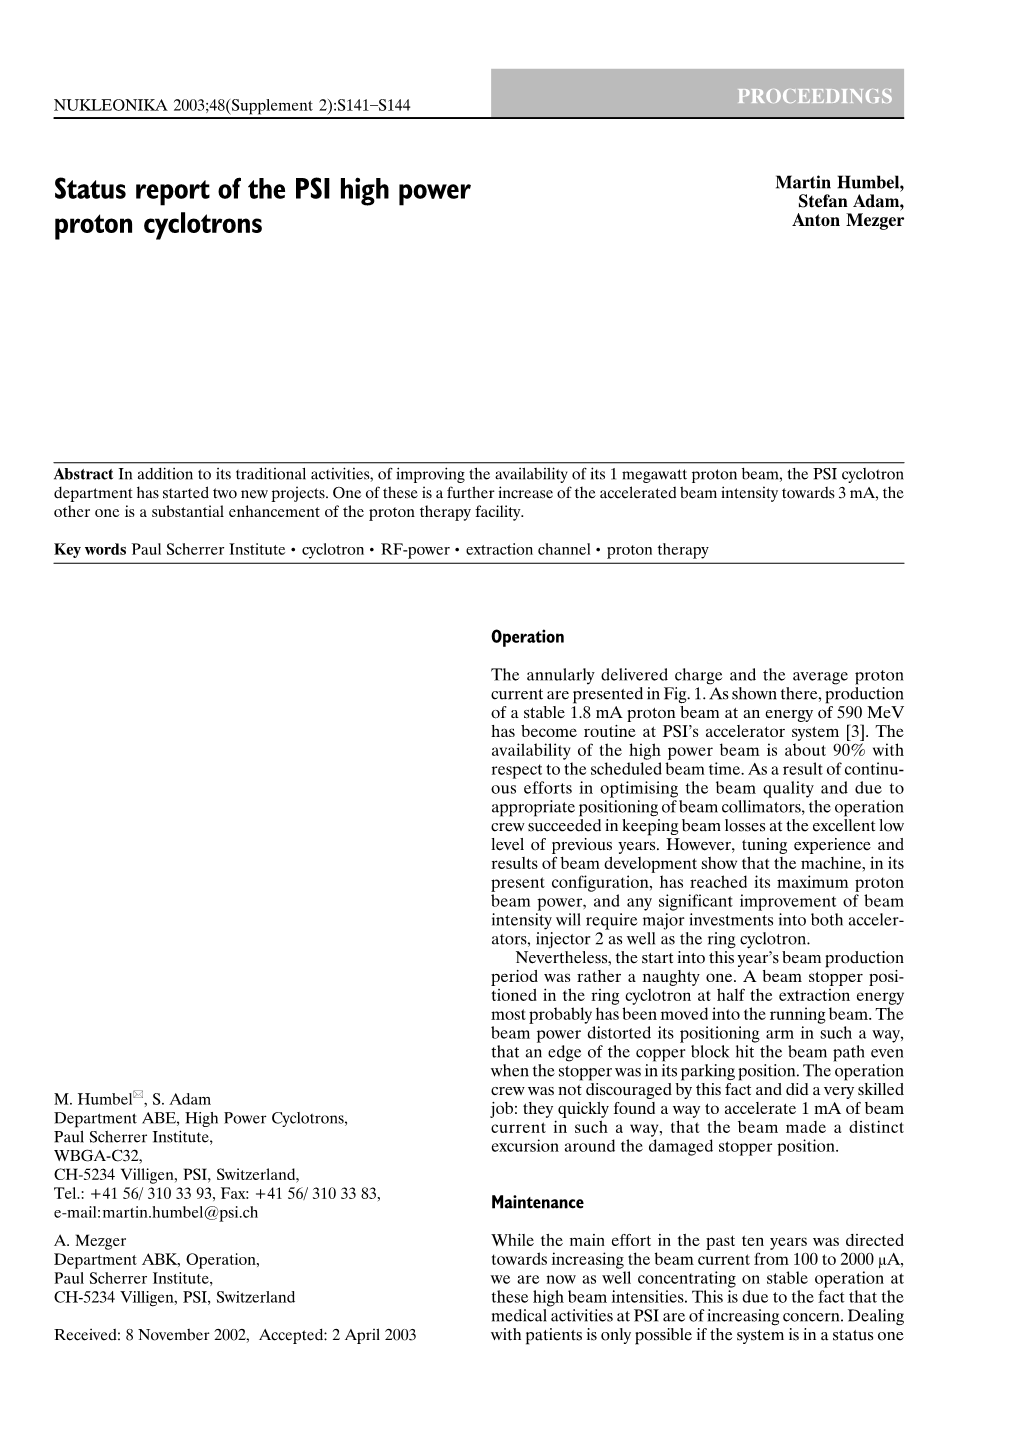 Status Report of the PSI High Power Proton Cyclotrons S143